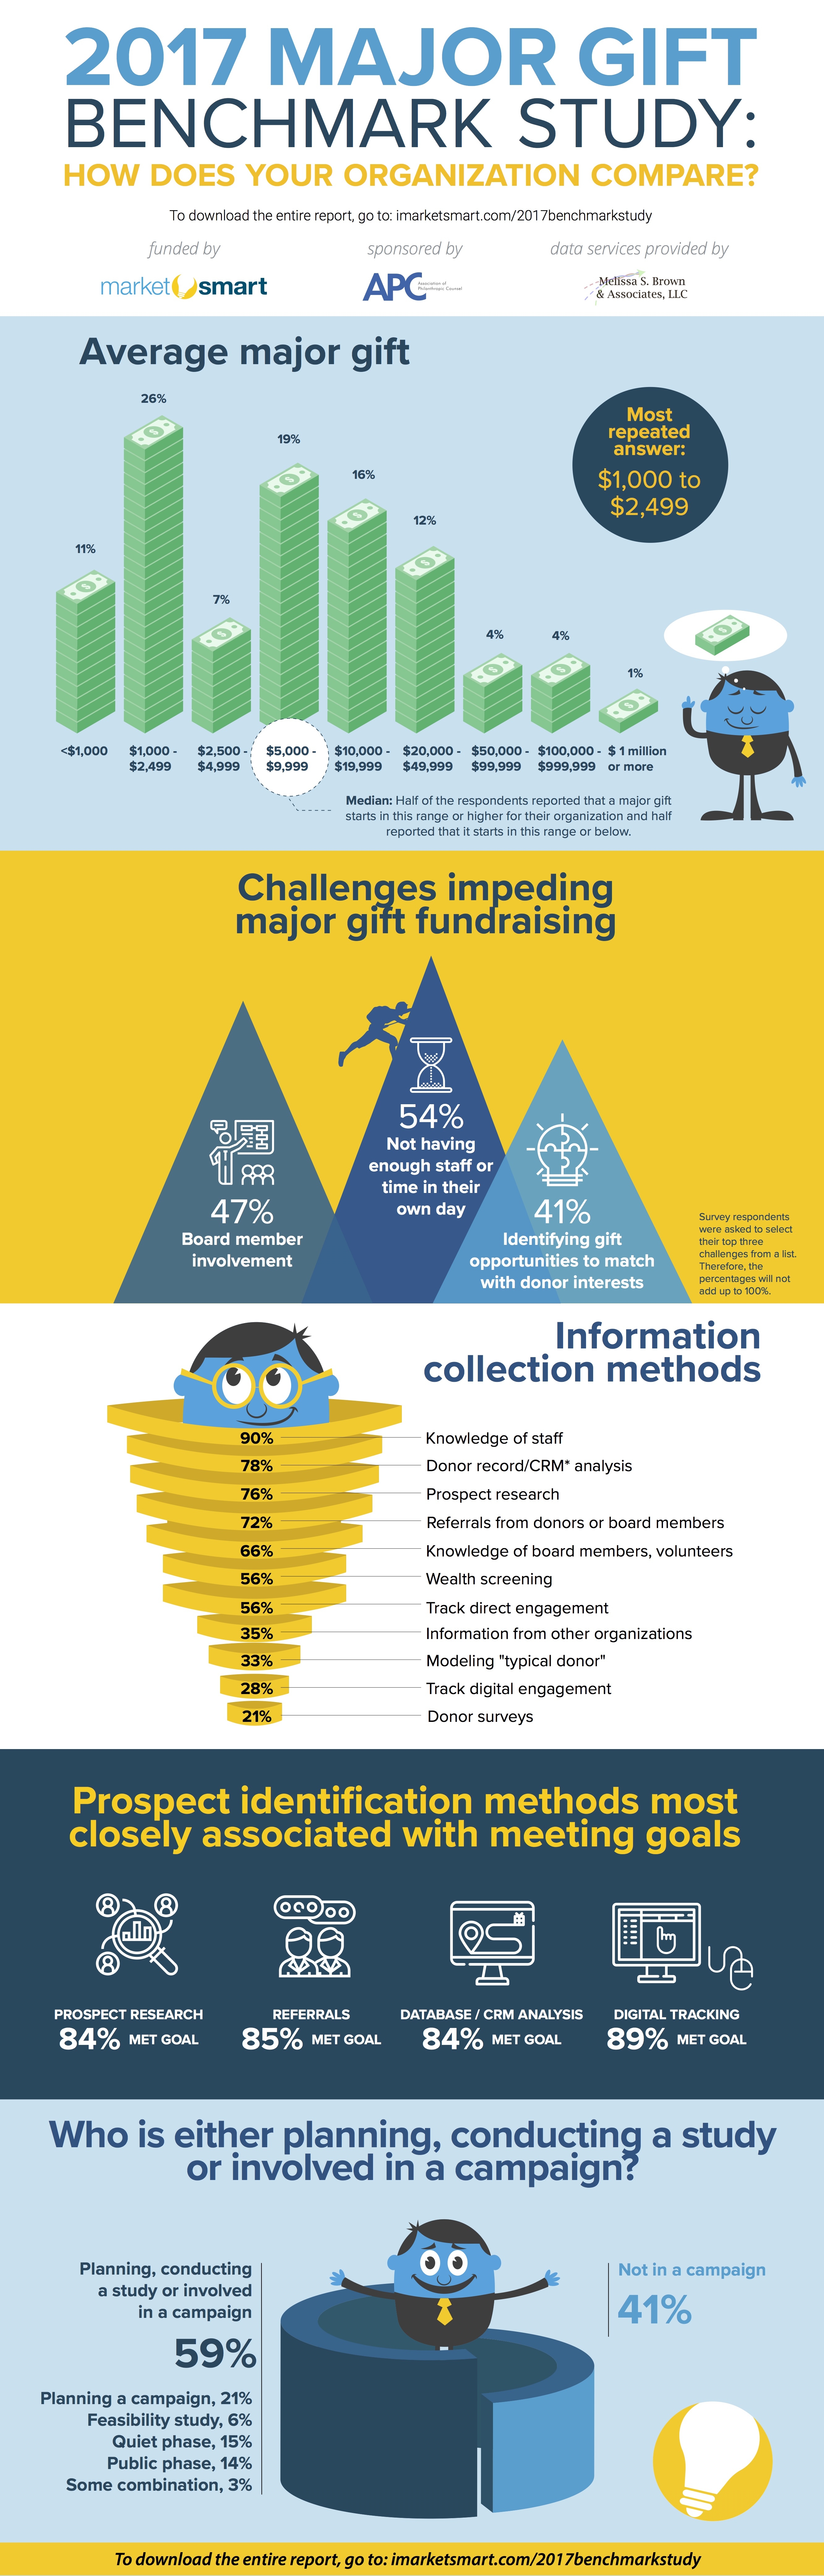 2017 Major Gifts Fundraising Benchmark Study Infographic